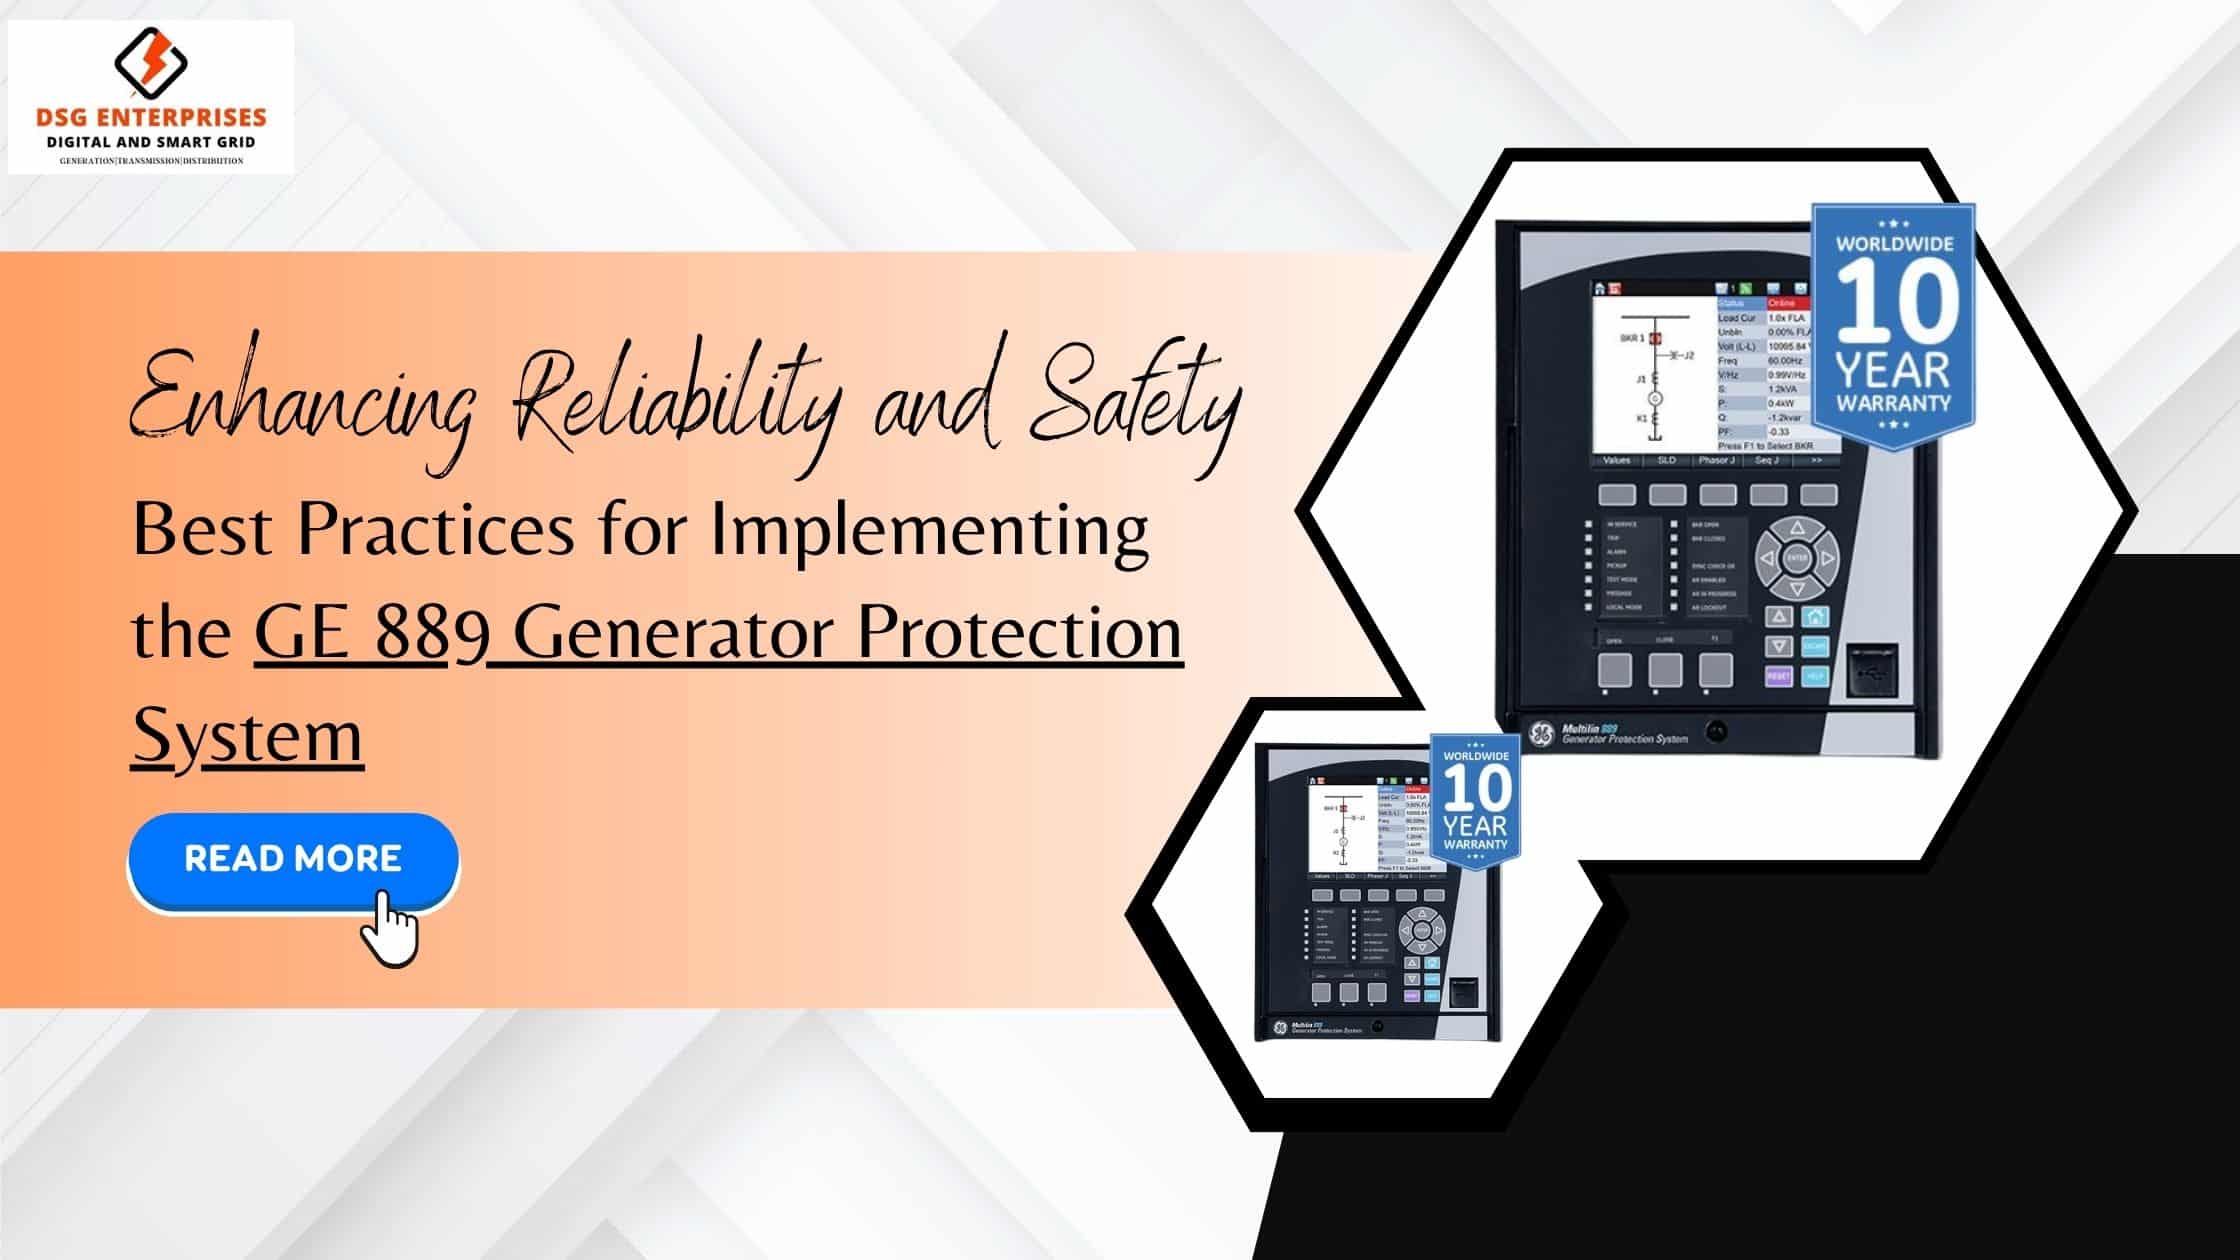 You are currently viewing Enhancing Reliability and Safety: Best Practices for Implementing the GE 889 Generator Protection System